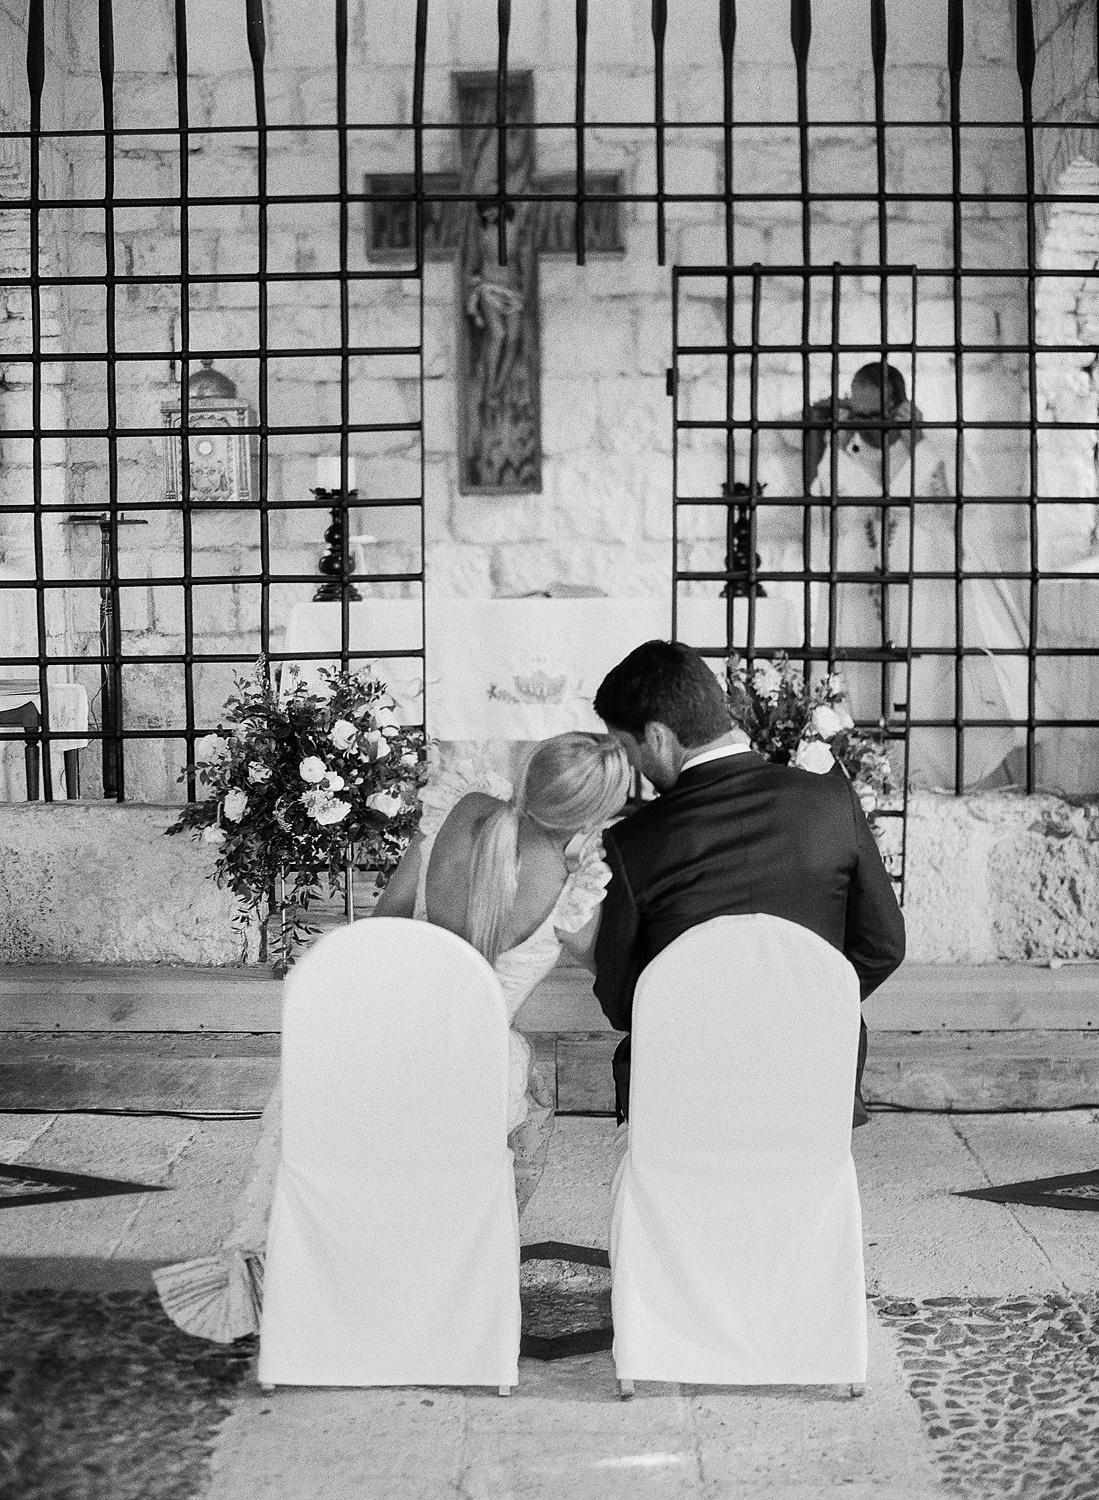 Bride and groom sitting and chatting together during private family ceremony at Altos De Chavon.